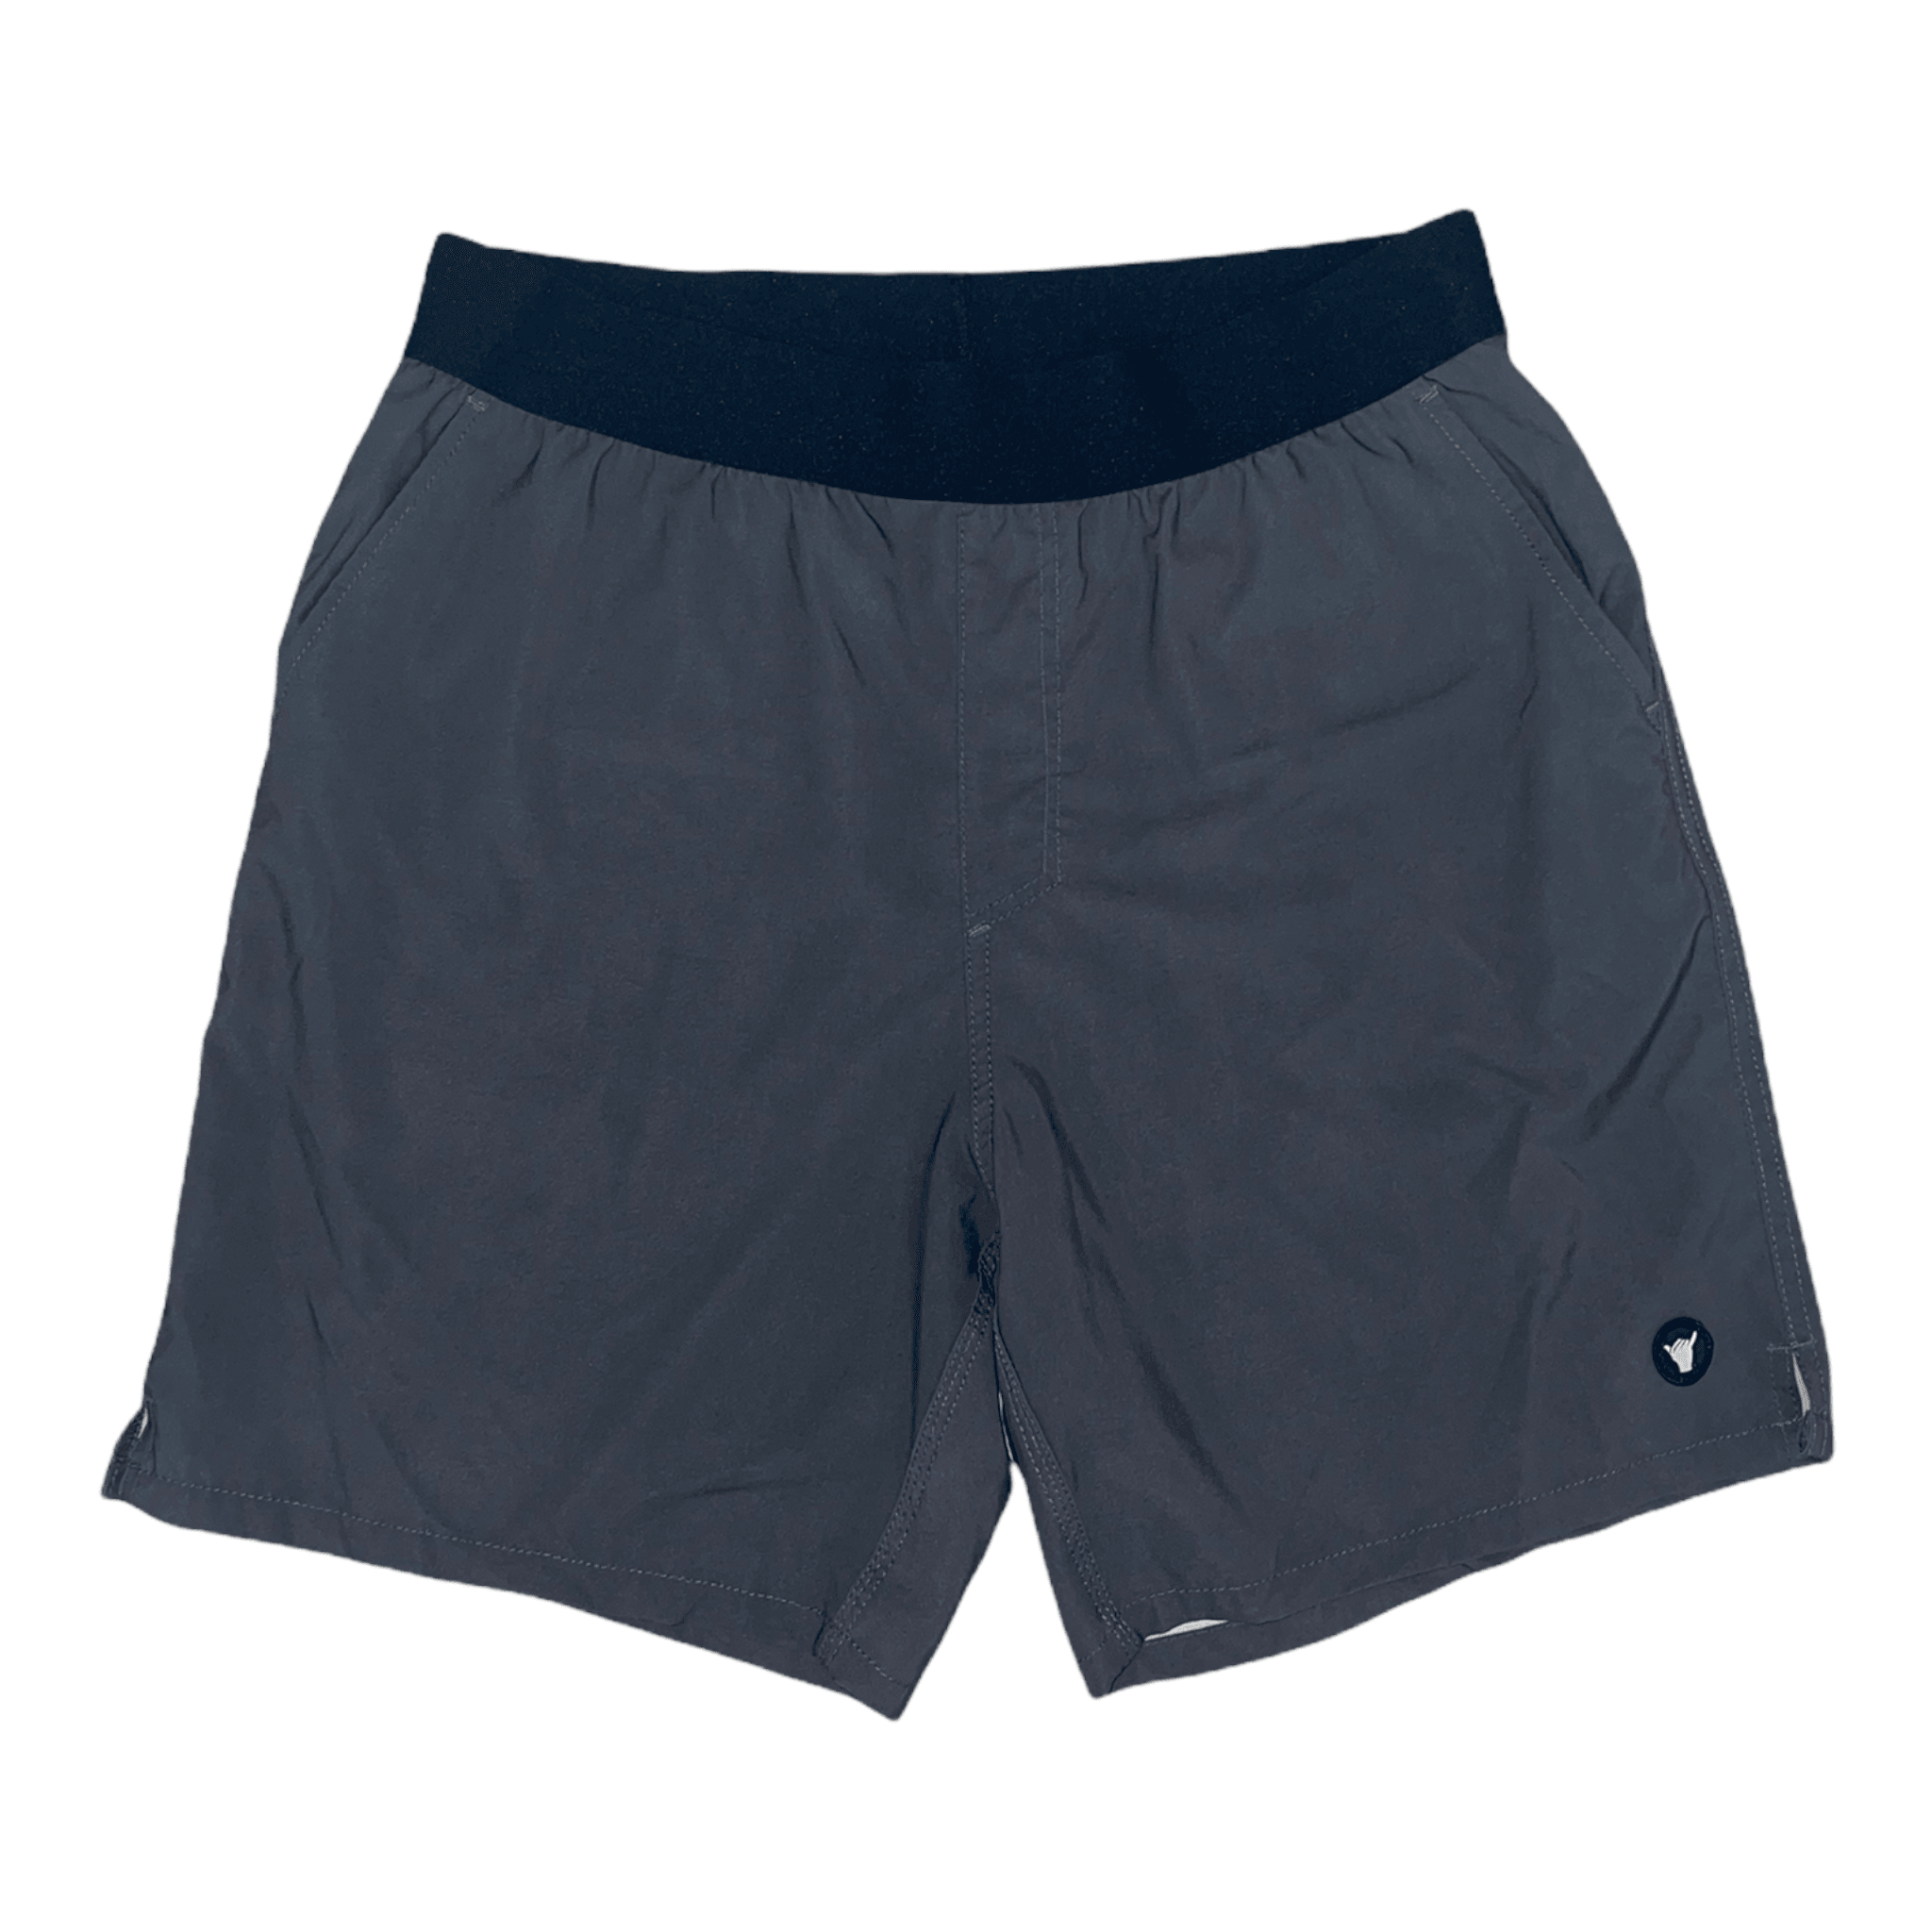 Track Shorts in Grey – Flo Active